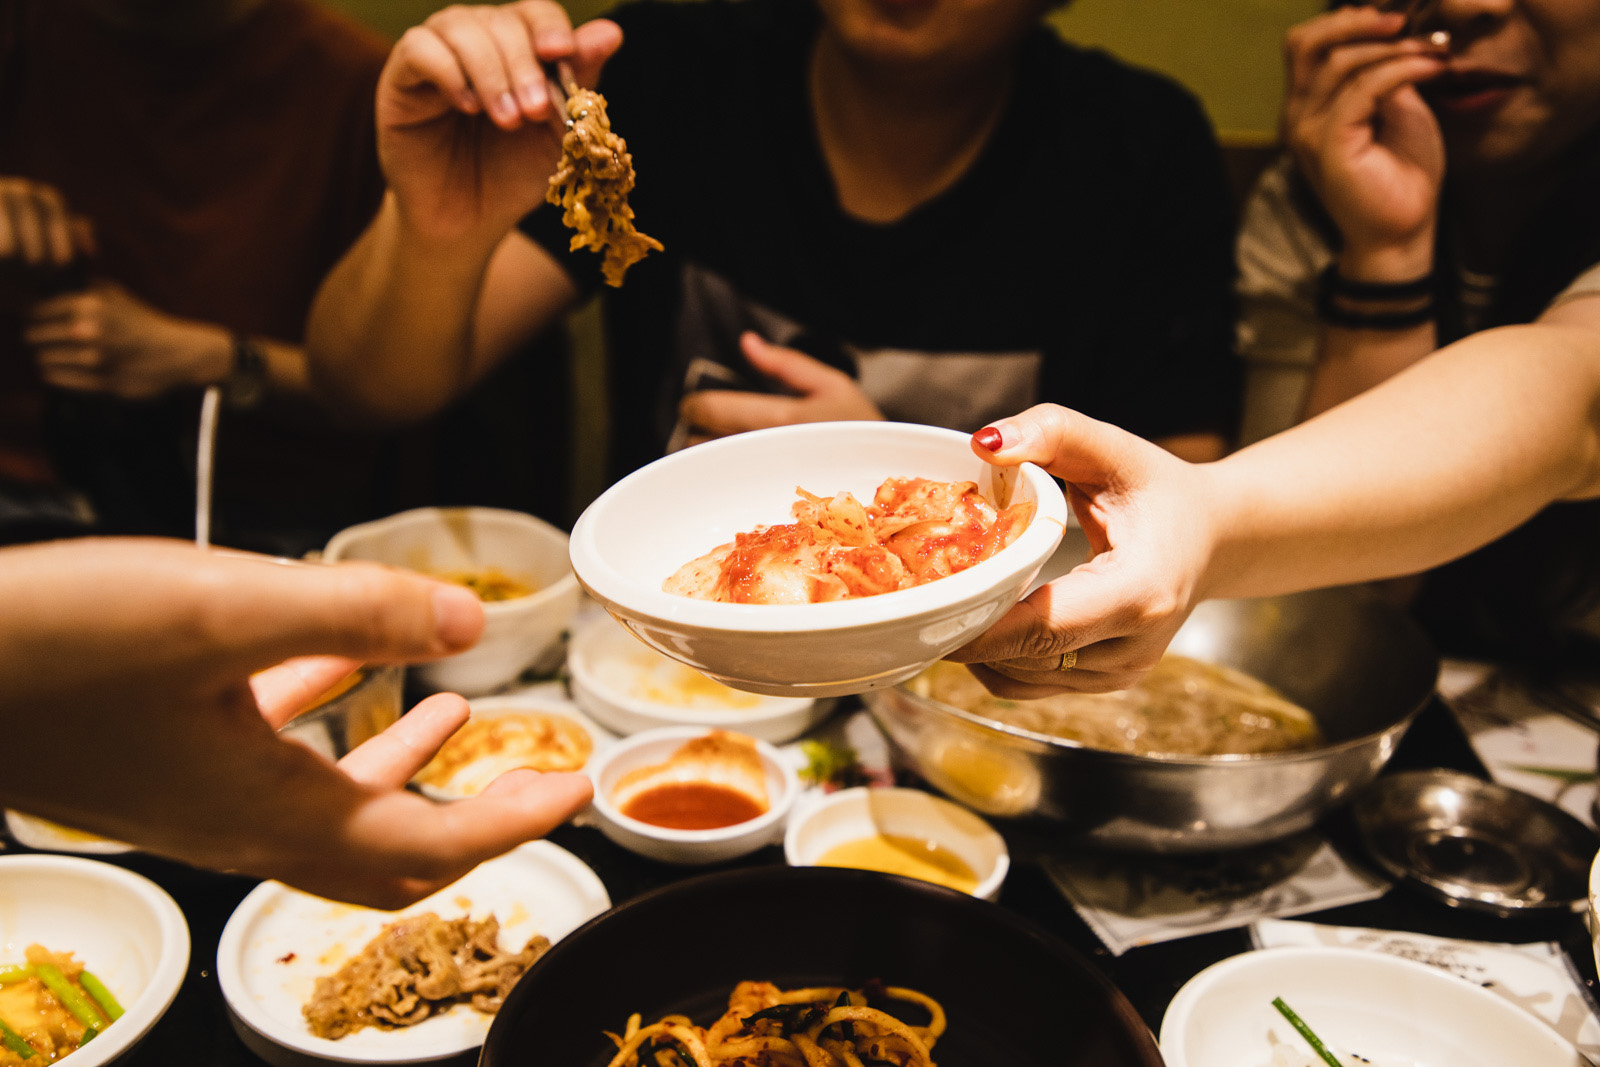 Diners pass a bowl of kimchi around the table.